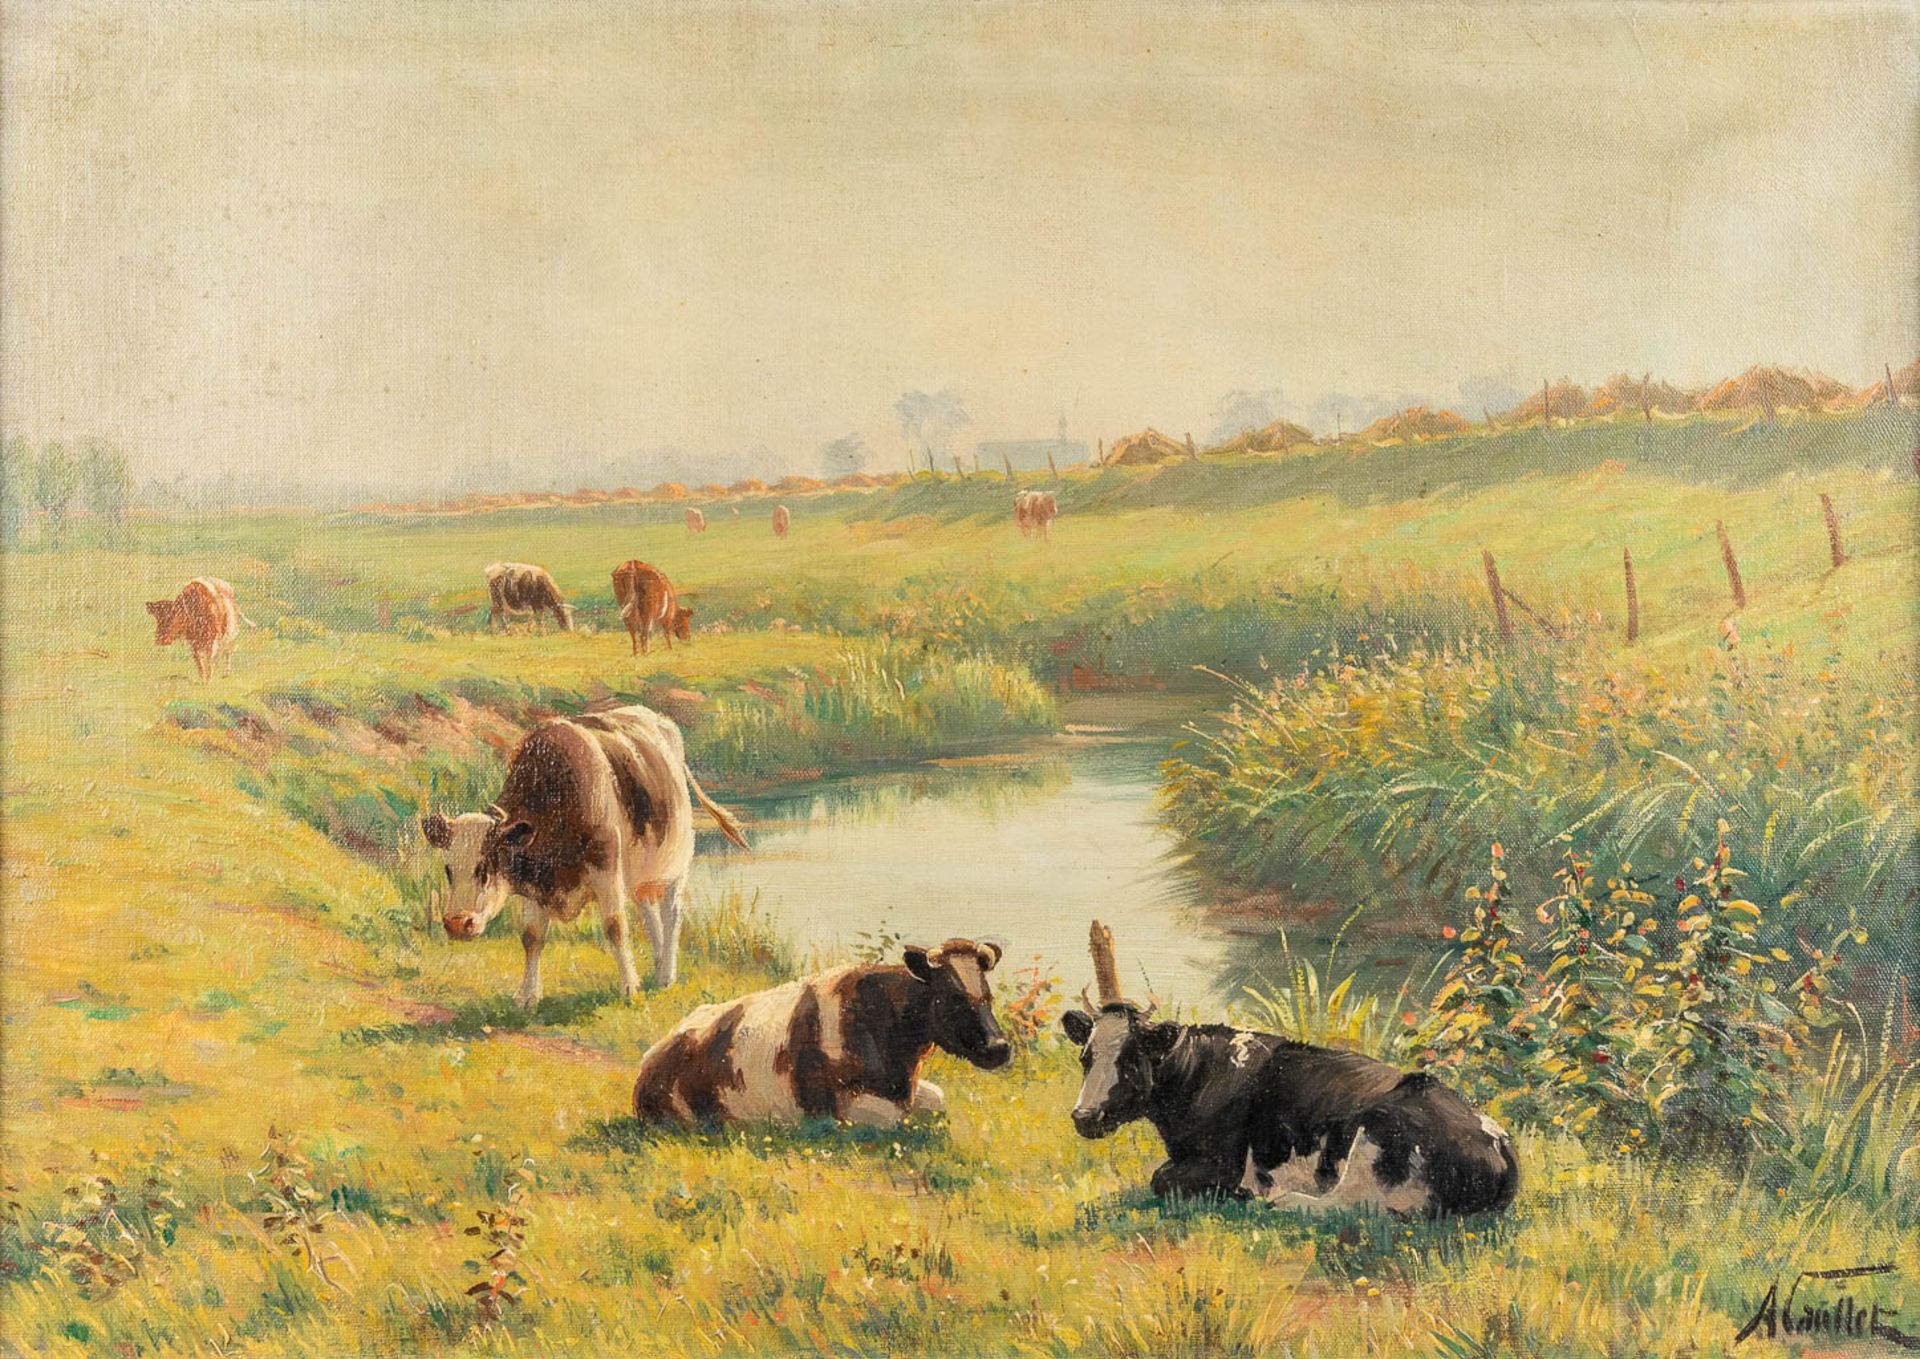 Albert CAULLET (1875-1950) 'Cows in the field' a painting, oil on canvas. (W:70 x H:50 cm)